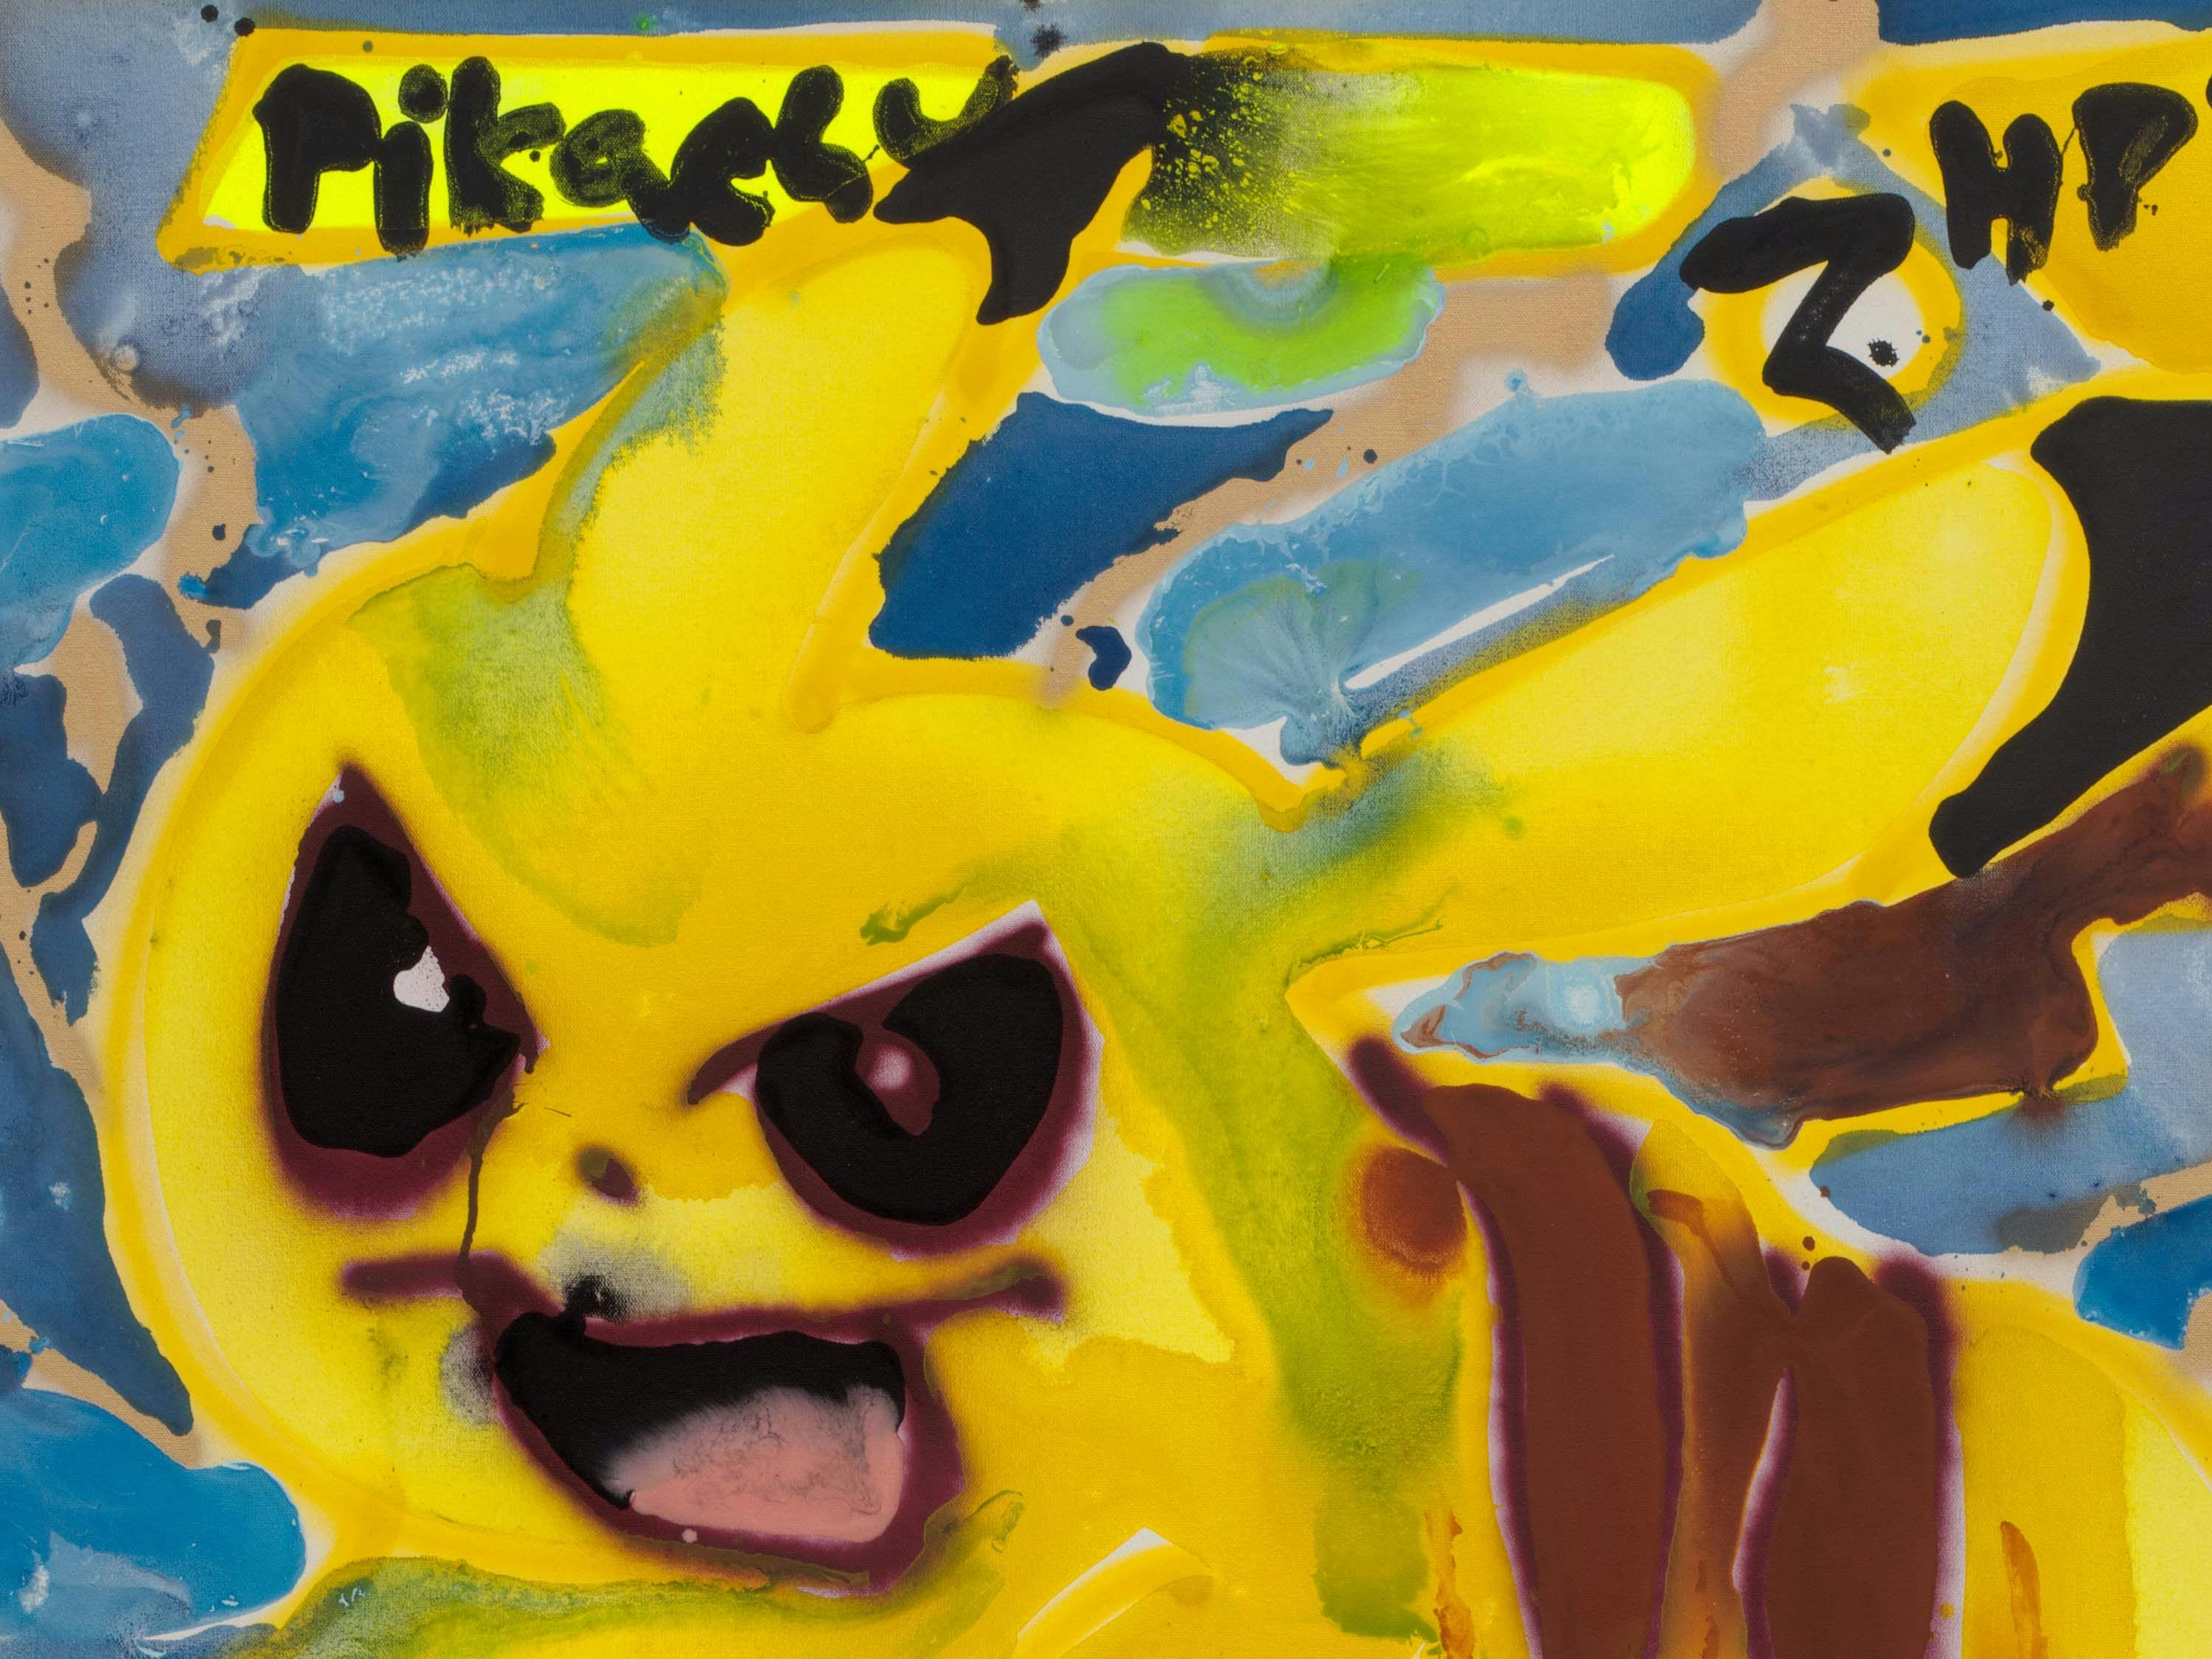 A detail from a painting by Katherine Bernhardt, titled Pikachu Pikaball, dated 2021.